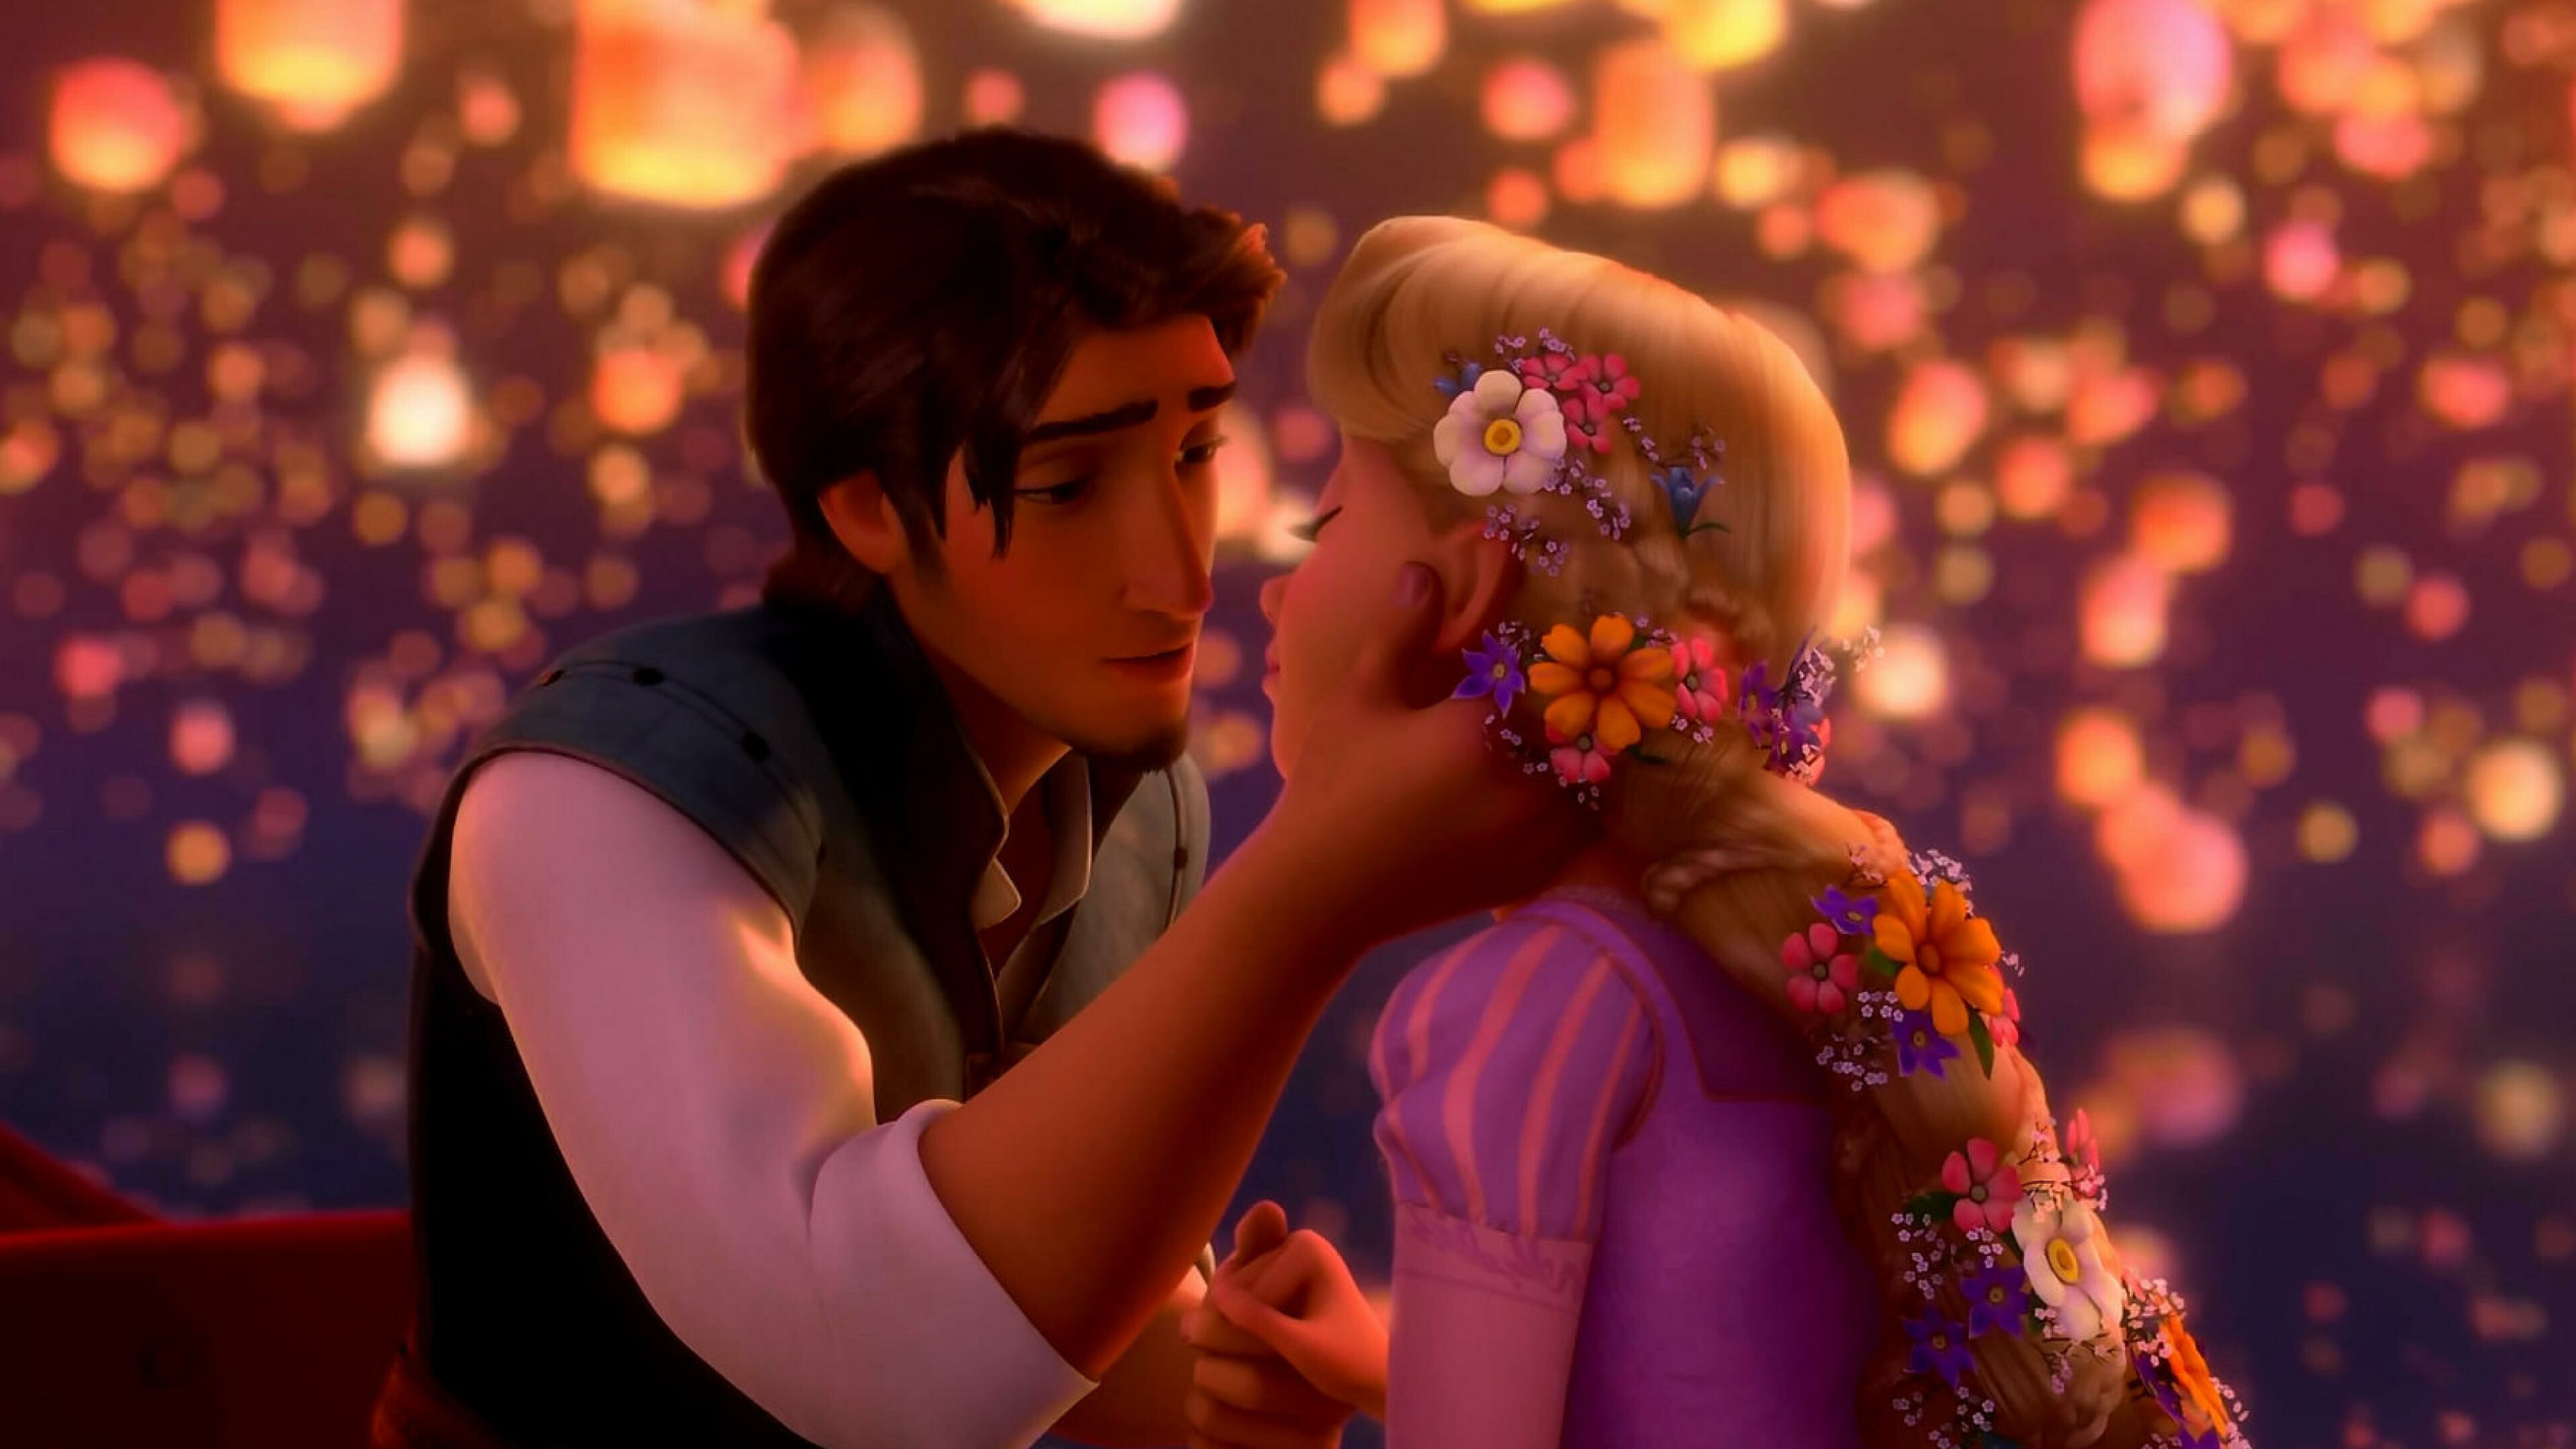 Tangled: The story based on the German fairy tale Rapunzel. 3840x2160 4K Wallpaper.